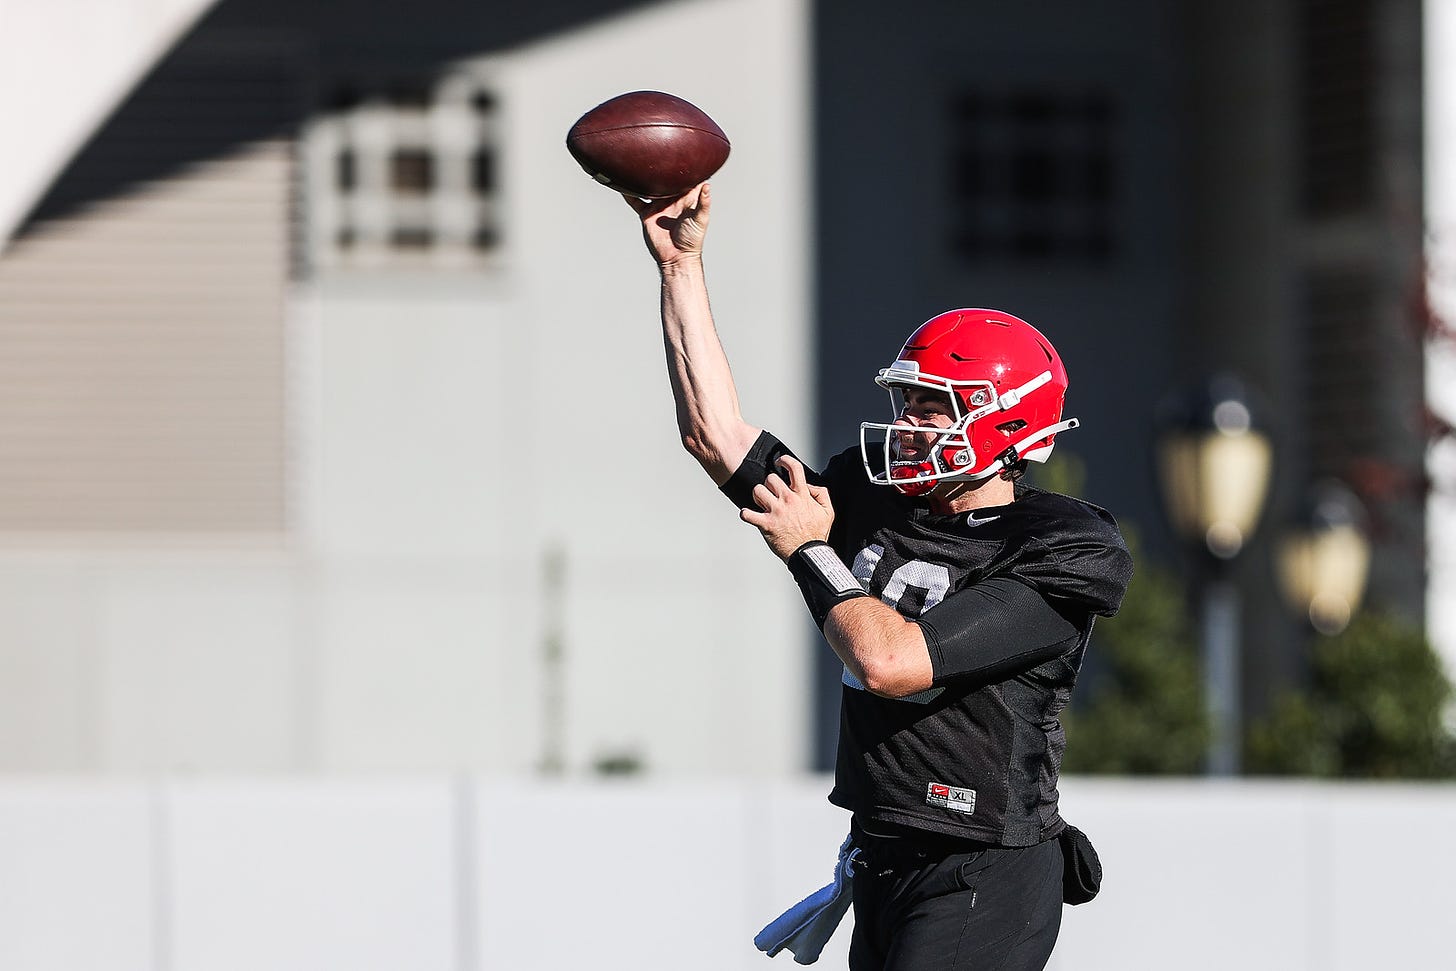 Georgia quarterback JT Daniels (18) during the Bulldogs’ practice session in Athens, Ga., on Wednesday, Oct. 27, 2021. (Photo by Mackenzie Miles)